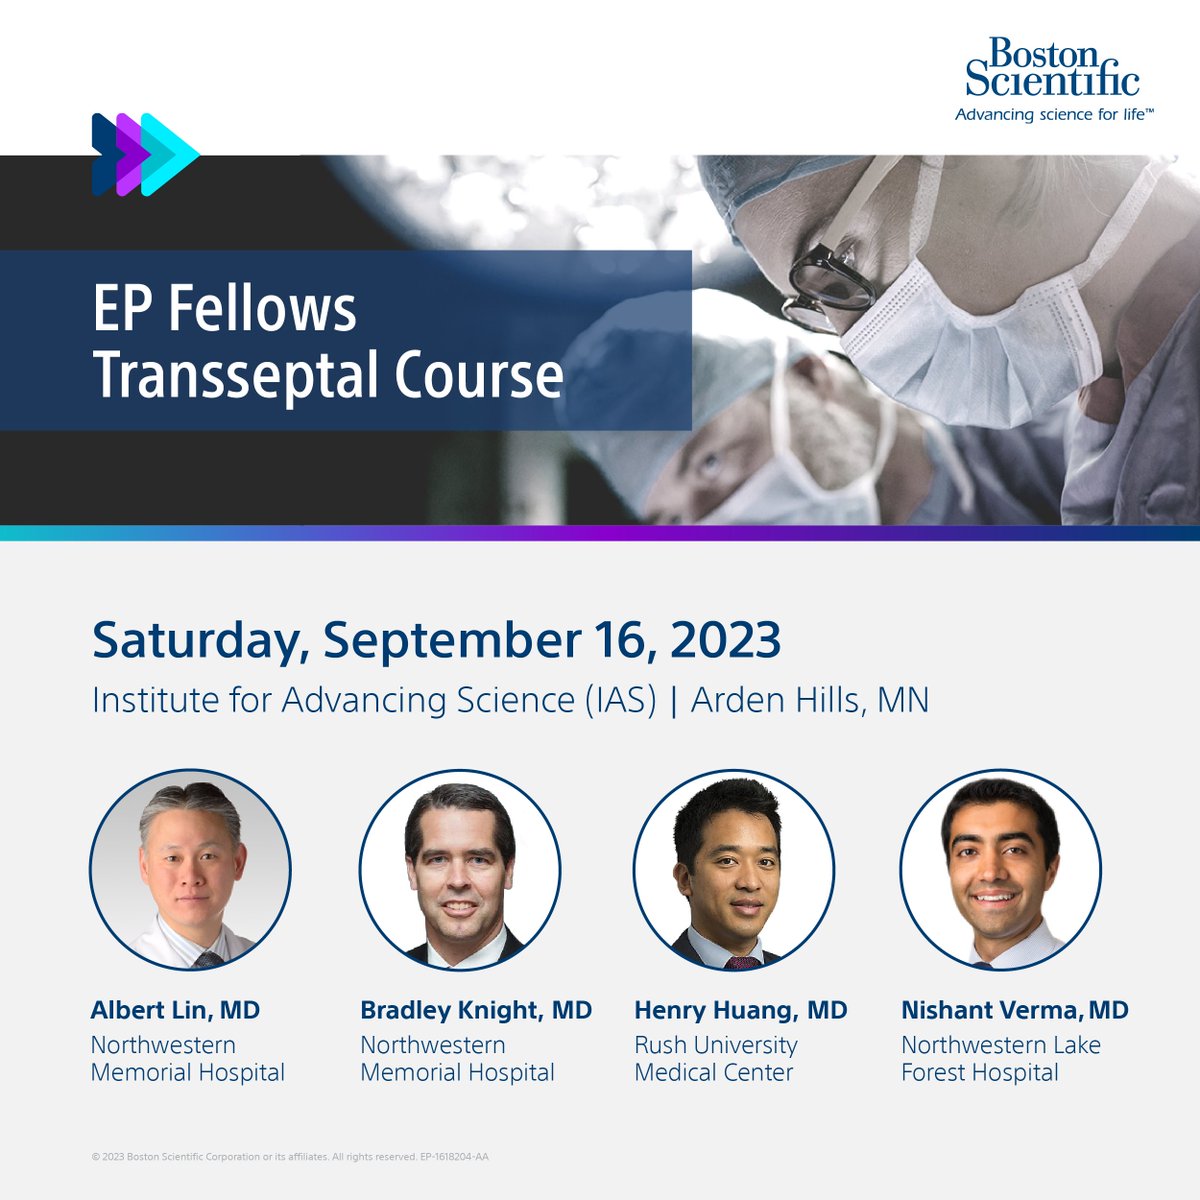 Join us in Minneapolis on 9/15-9/16 for a BSCI sponsored meeting on transseptal catheterization, cardiac anatomy, ICE, LAAO and much more. @NishantVermaMD @DrBradleyKnight @hhuang123